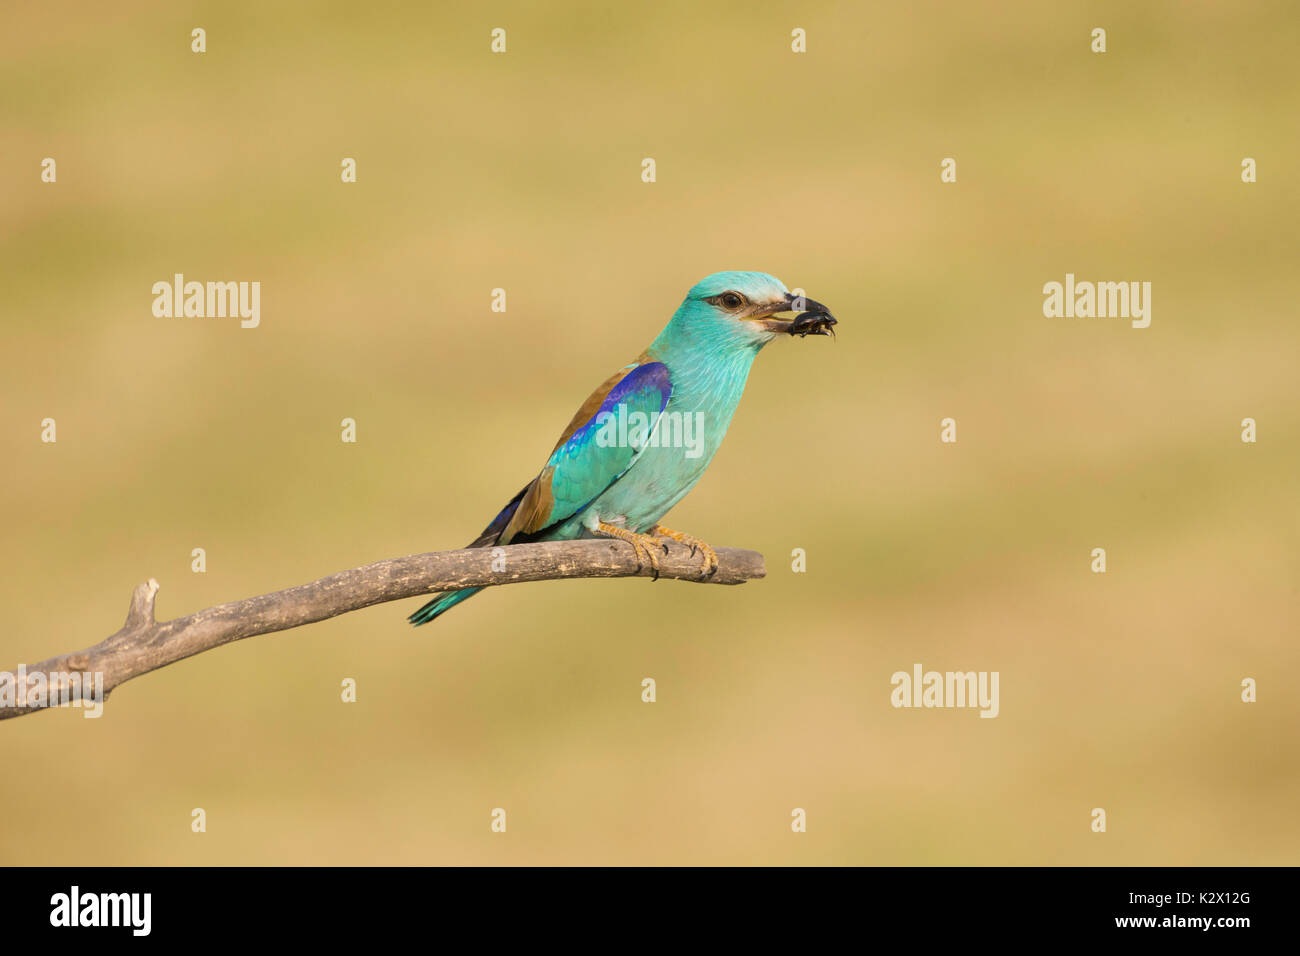 European Roller (Coracias garrulus), adult, perched on branch with insect prey, Vojvodina, Serbia, June Stock Photo